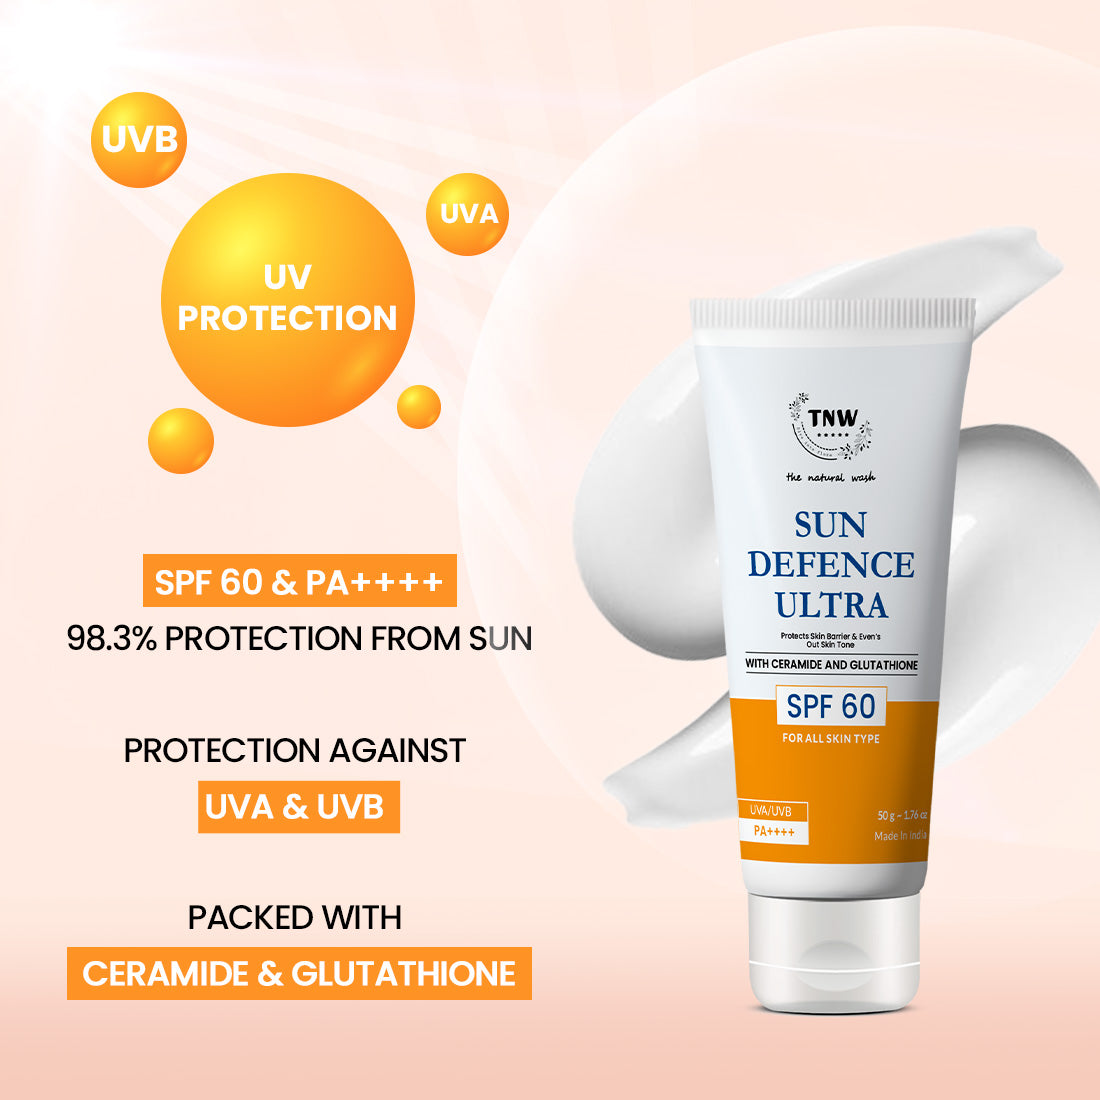 Sun Defence SPF 60 Cream with Glutathione | Protection Against UVA/UVB